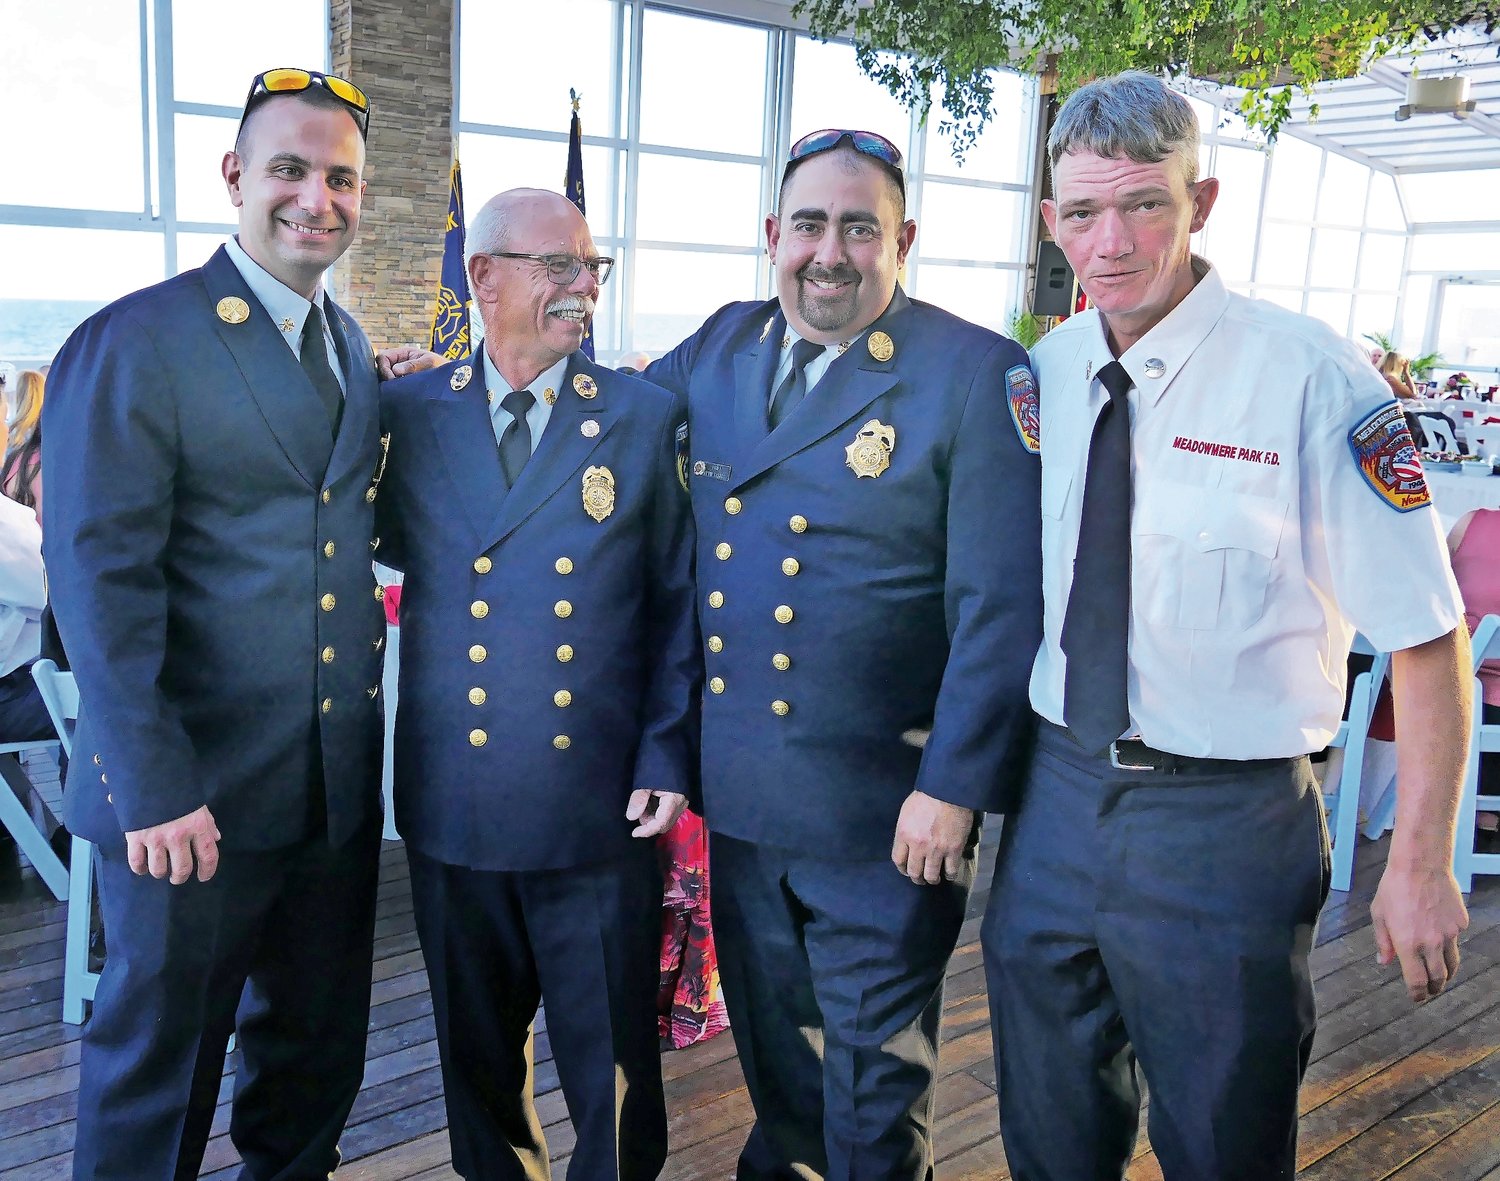 The Meadowmere Park Fire Department celebrated its 76th installation of officers on Aug. 12. From left were 2nd Assistant Chief John Gogel, Safety Officer Scott Howie, Chief Kevin Carrero and Lt. Joseph Bidel.